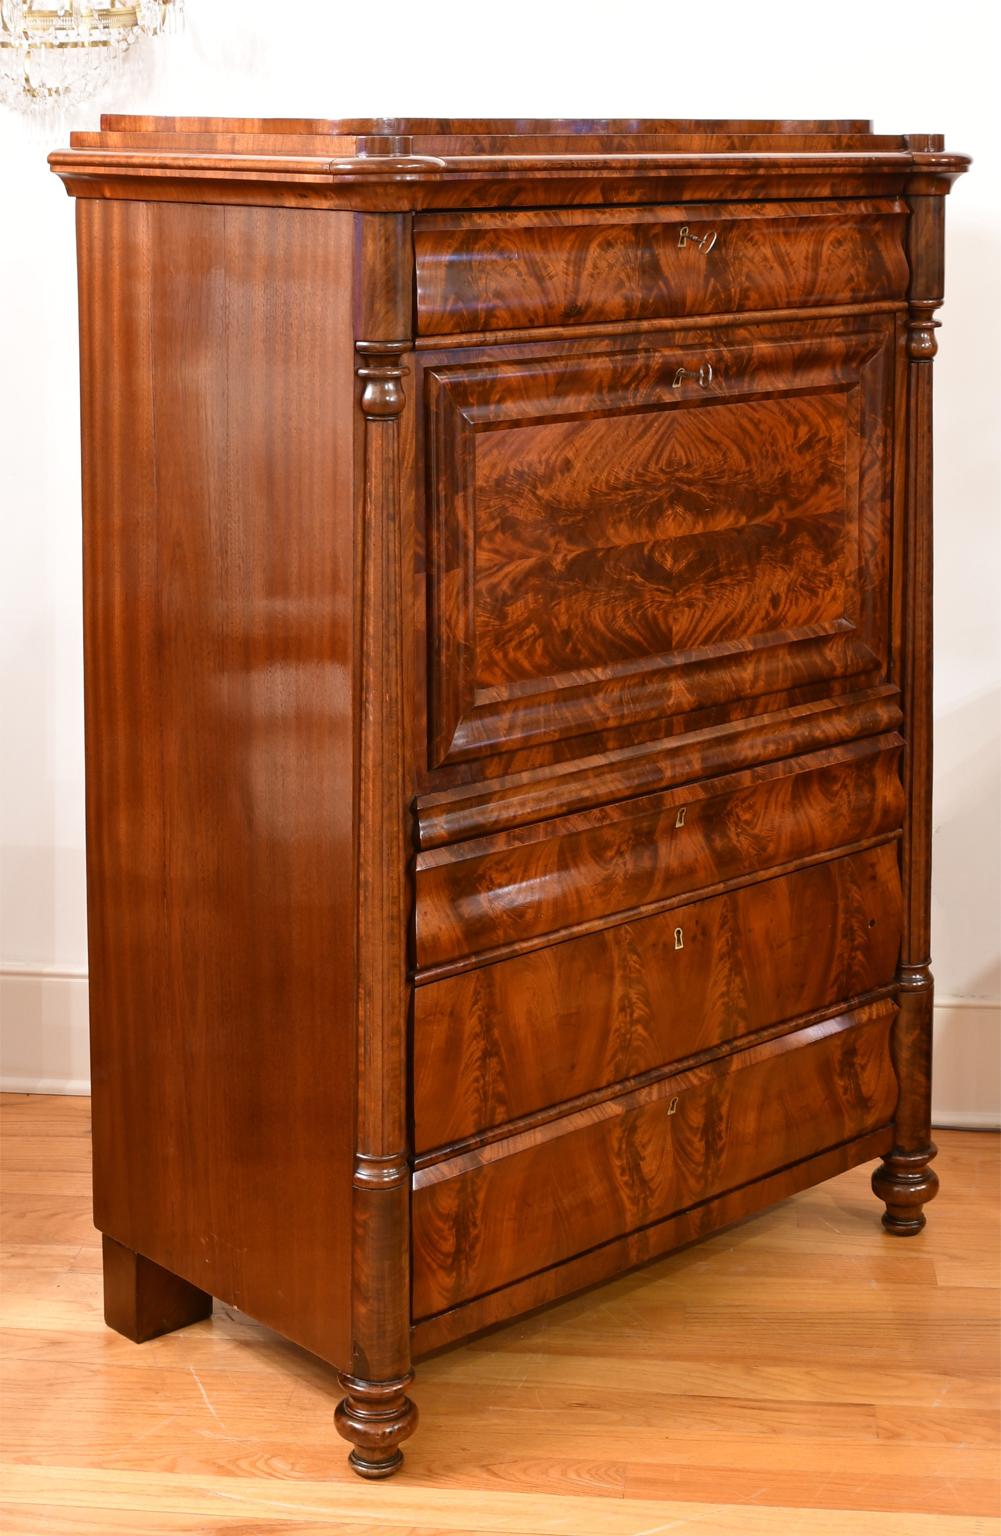 Hand-Carved Antique Chest with Fall-Front Secretary Desk in West Indies Mahogany, Denmark